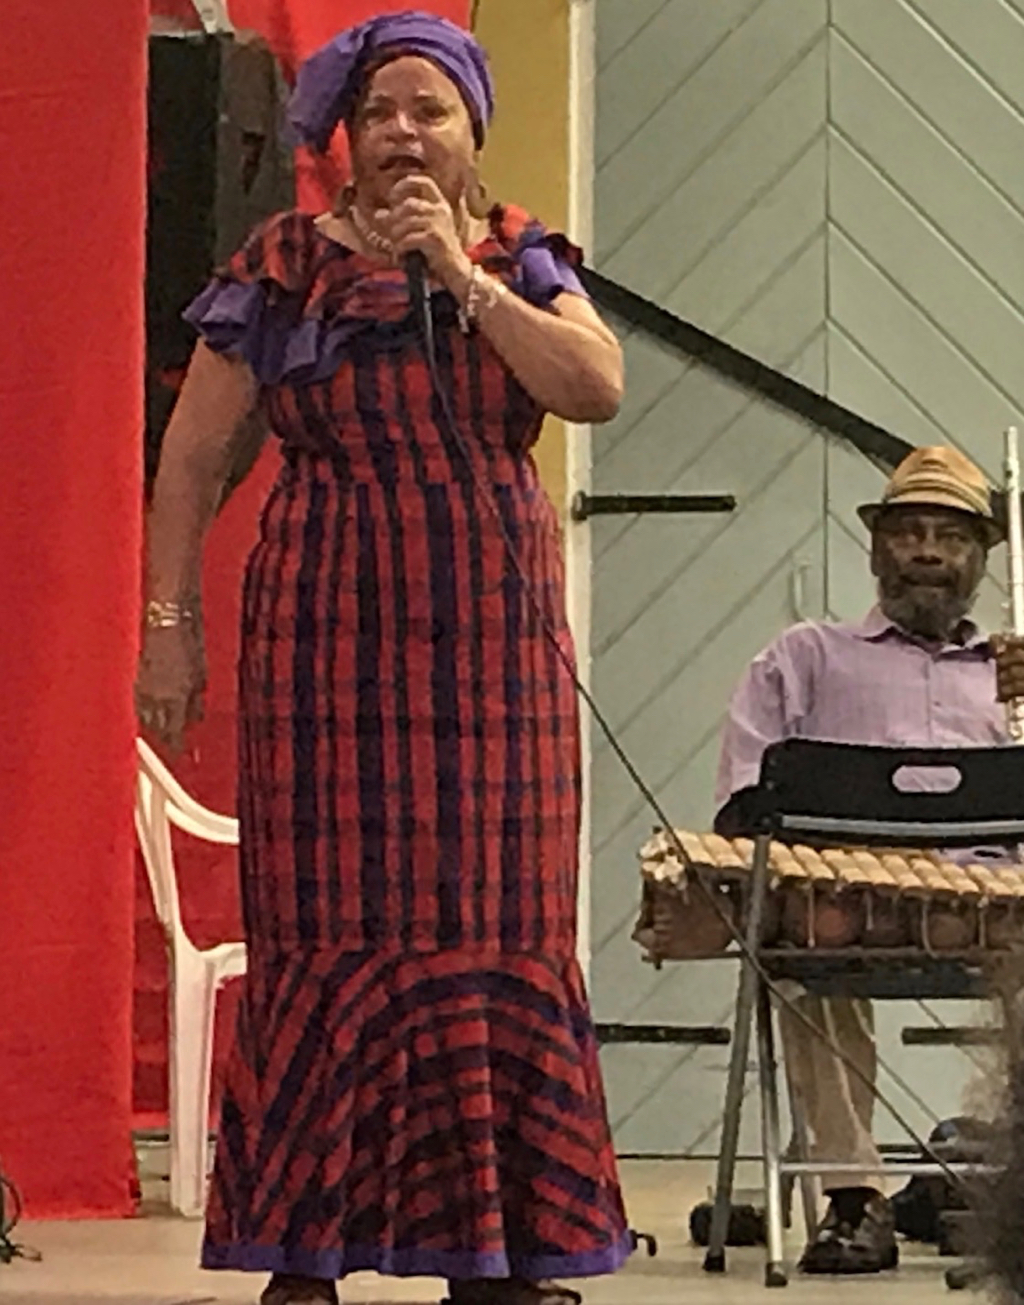 Cedelle Petersen Christopher, who learned Cariso from Leona Watson, performs 'Clear de Road' and 'Sly Mongoose.' Christopher is a retired educator who performs Cariso and storytelling and makes puppetry for school children. (Source photo by Elisa McKay)